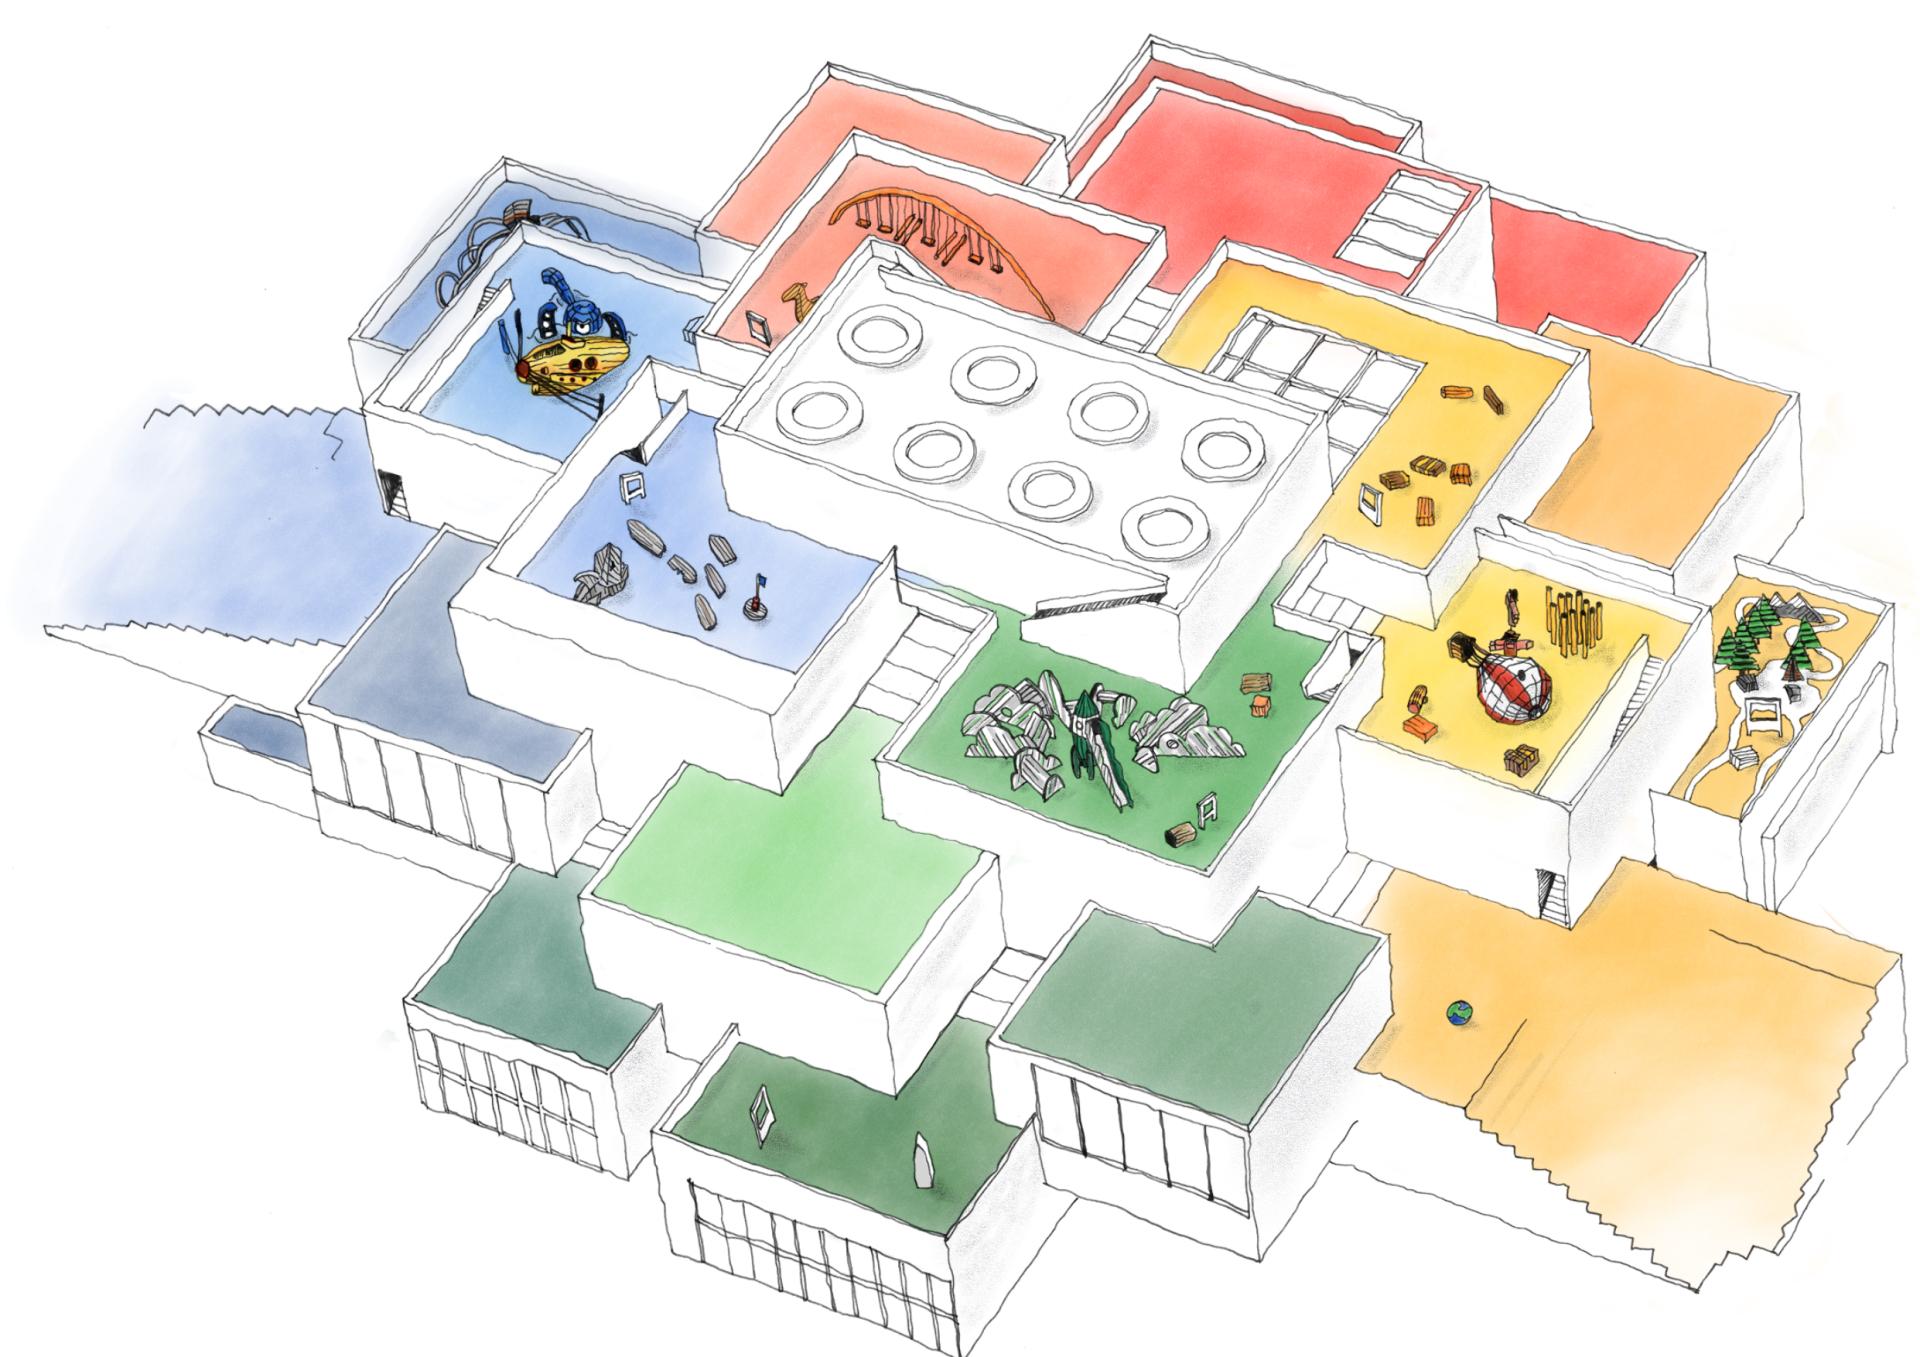 Sketch of LEGO House with playgrounds